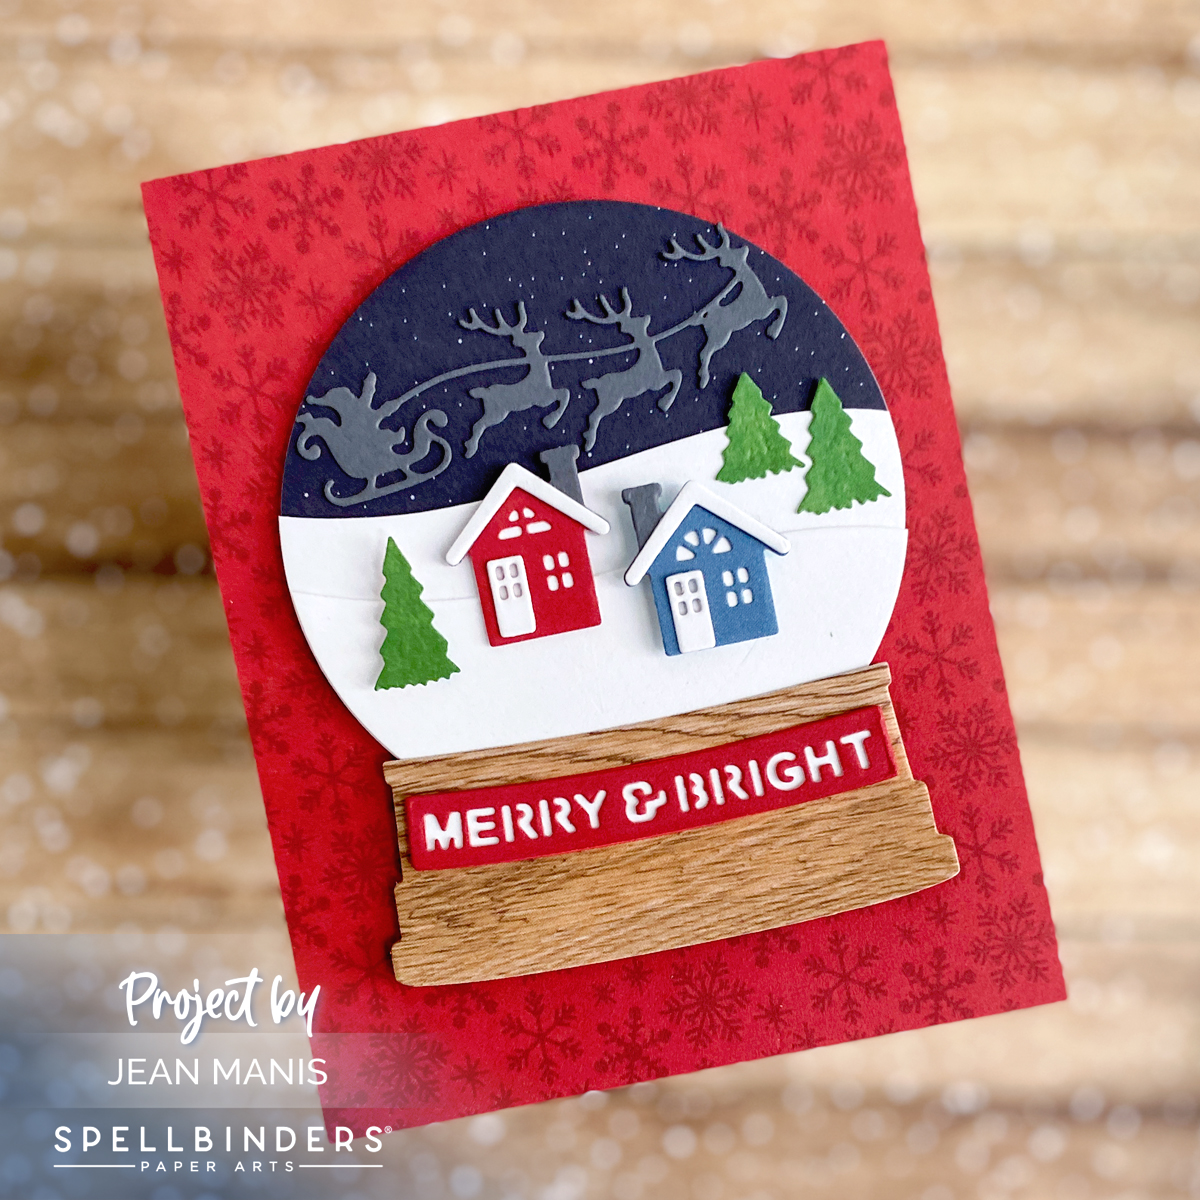 Spellbinders | Fave Holiday Products Blog Hop